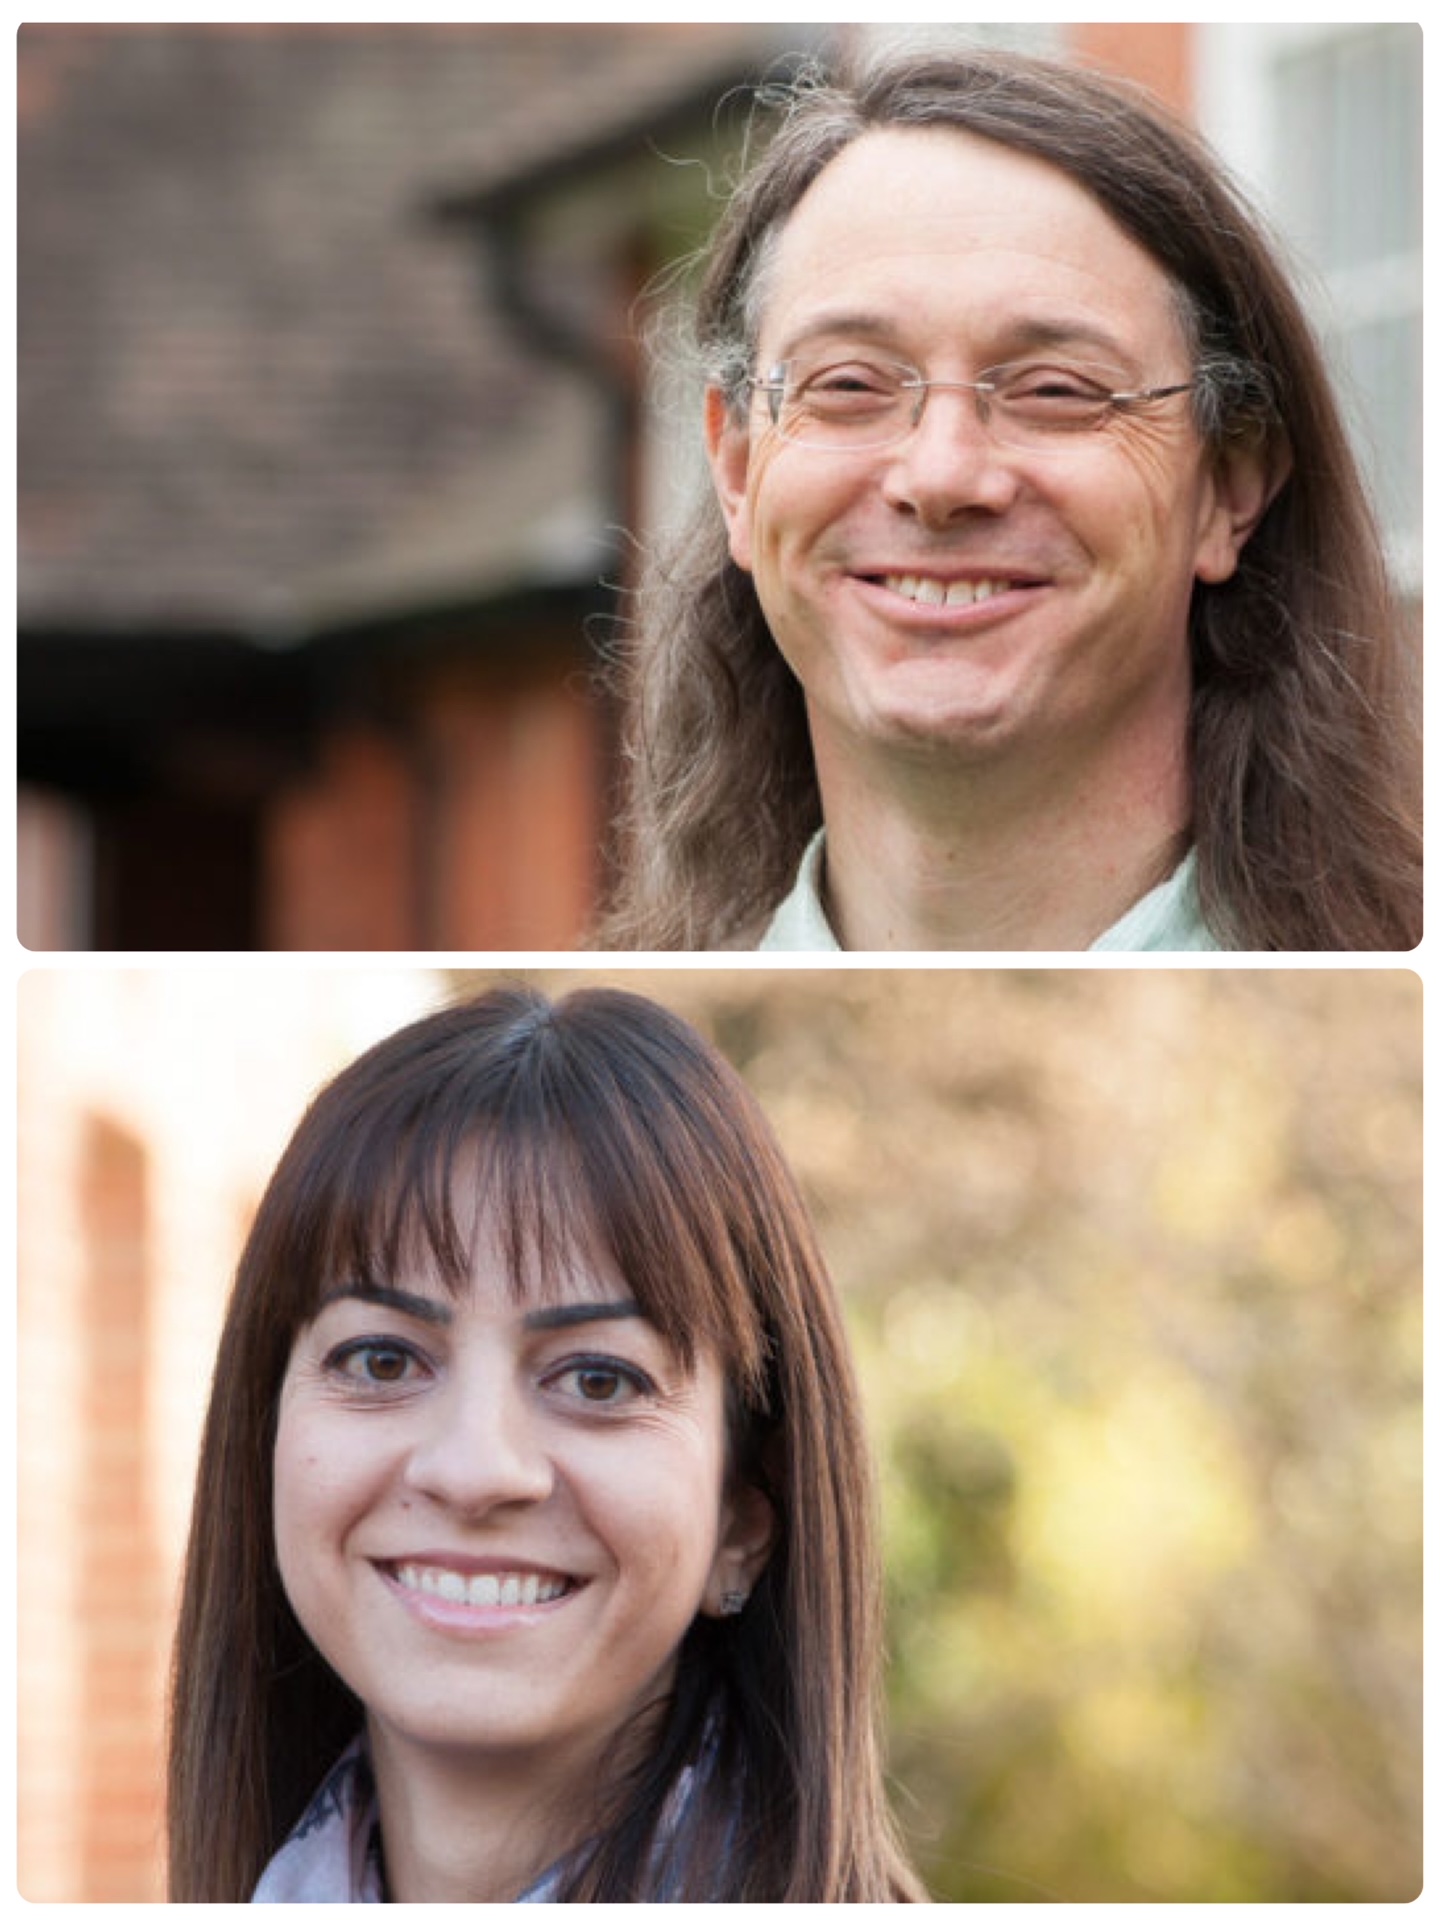 NEWS – Professor Richard Harris (Professor of History Education, University of Reading) and Dr. Maria Kambouri (Associate Professor of Early Childhood Care and Education, University of Reading) secure a combined internal funding of £5,000 to continue their project on working in partnership with parents and teachers about normalising LGBTQ+ conversations in primary schools